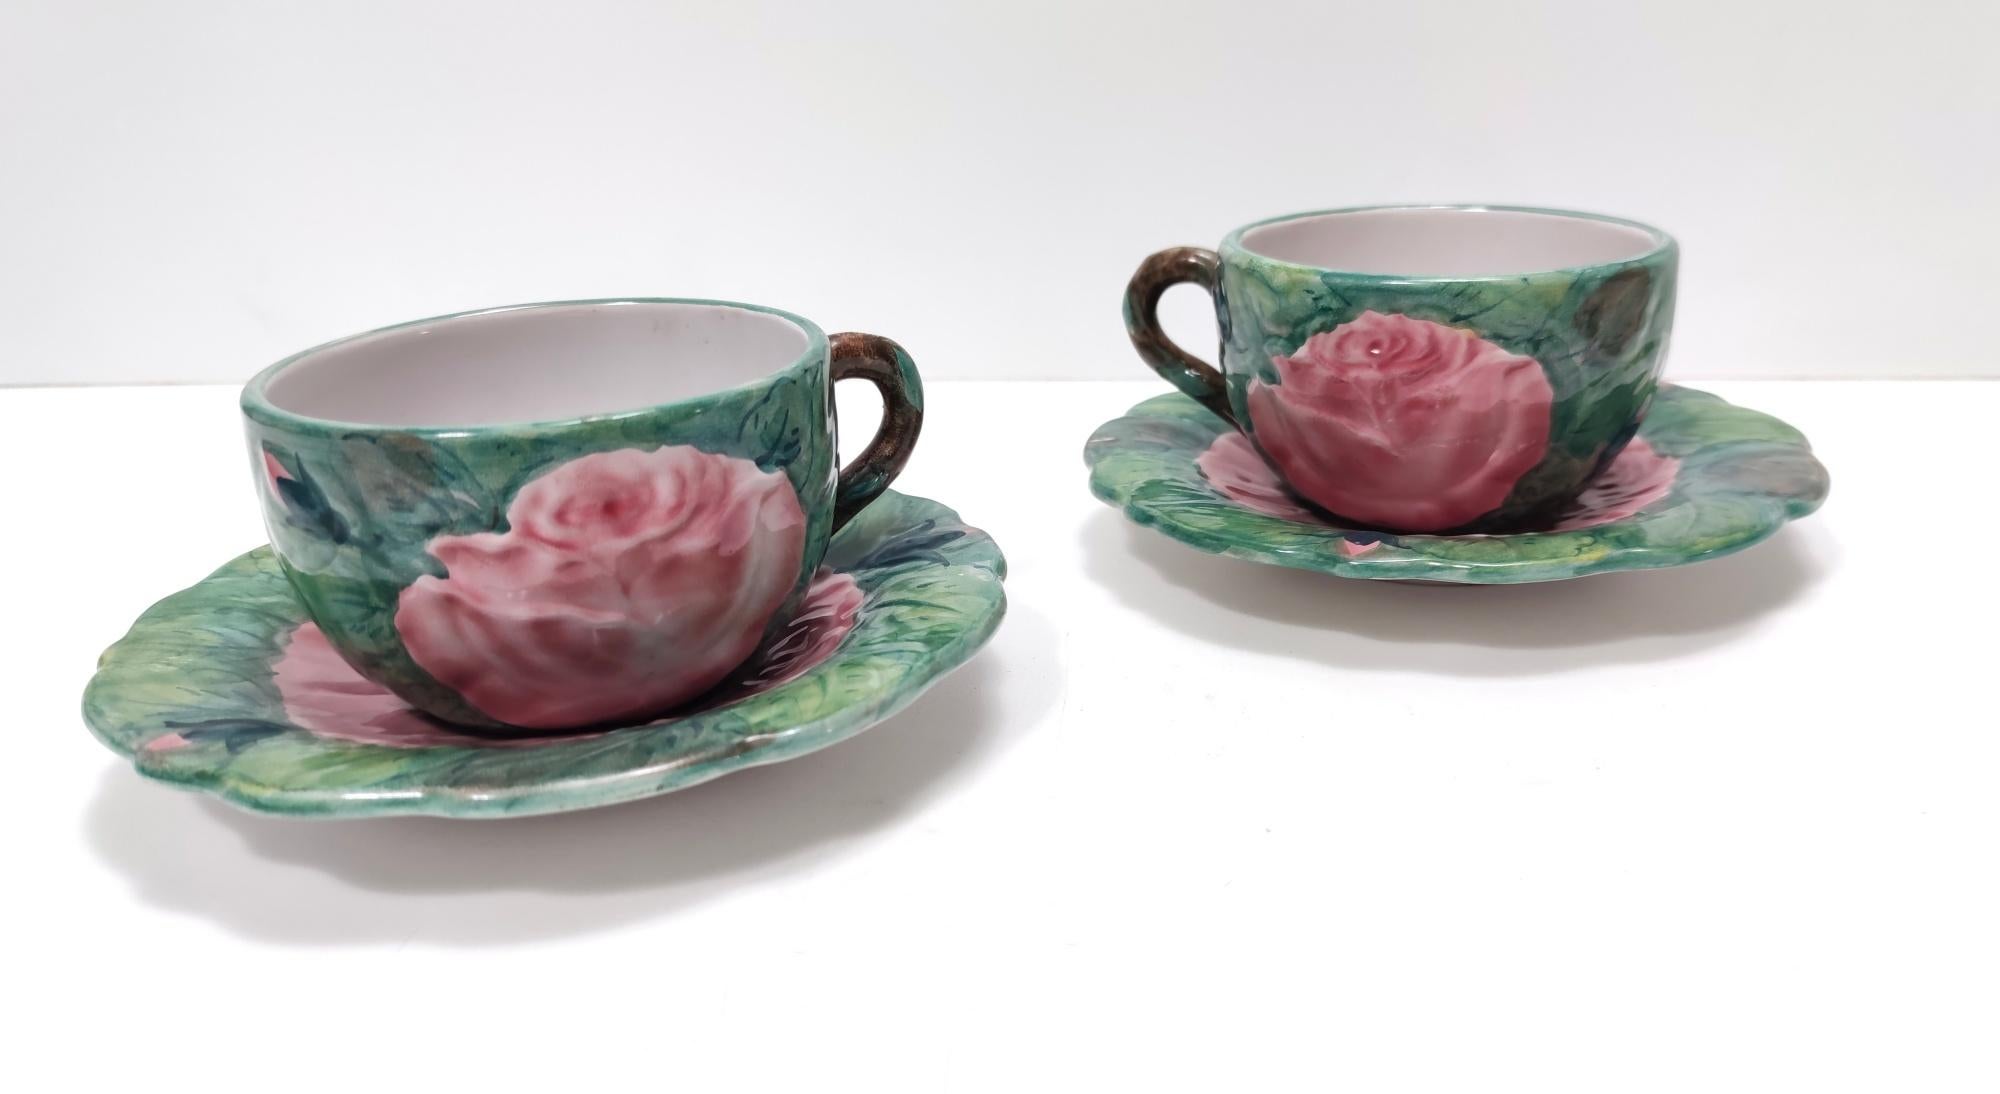 Pair of Green Earthenware Tea /Coffee Cups with Floral Motifs by Zaccagnini For Sale 11